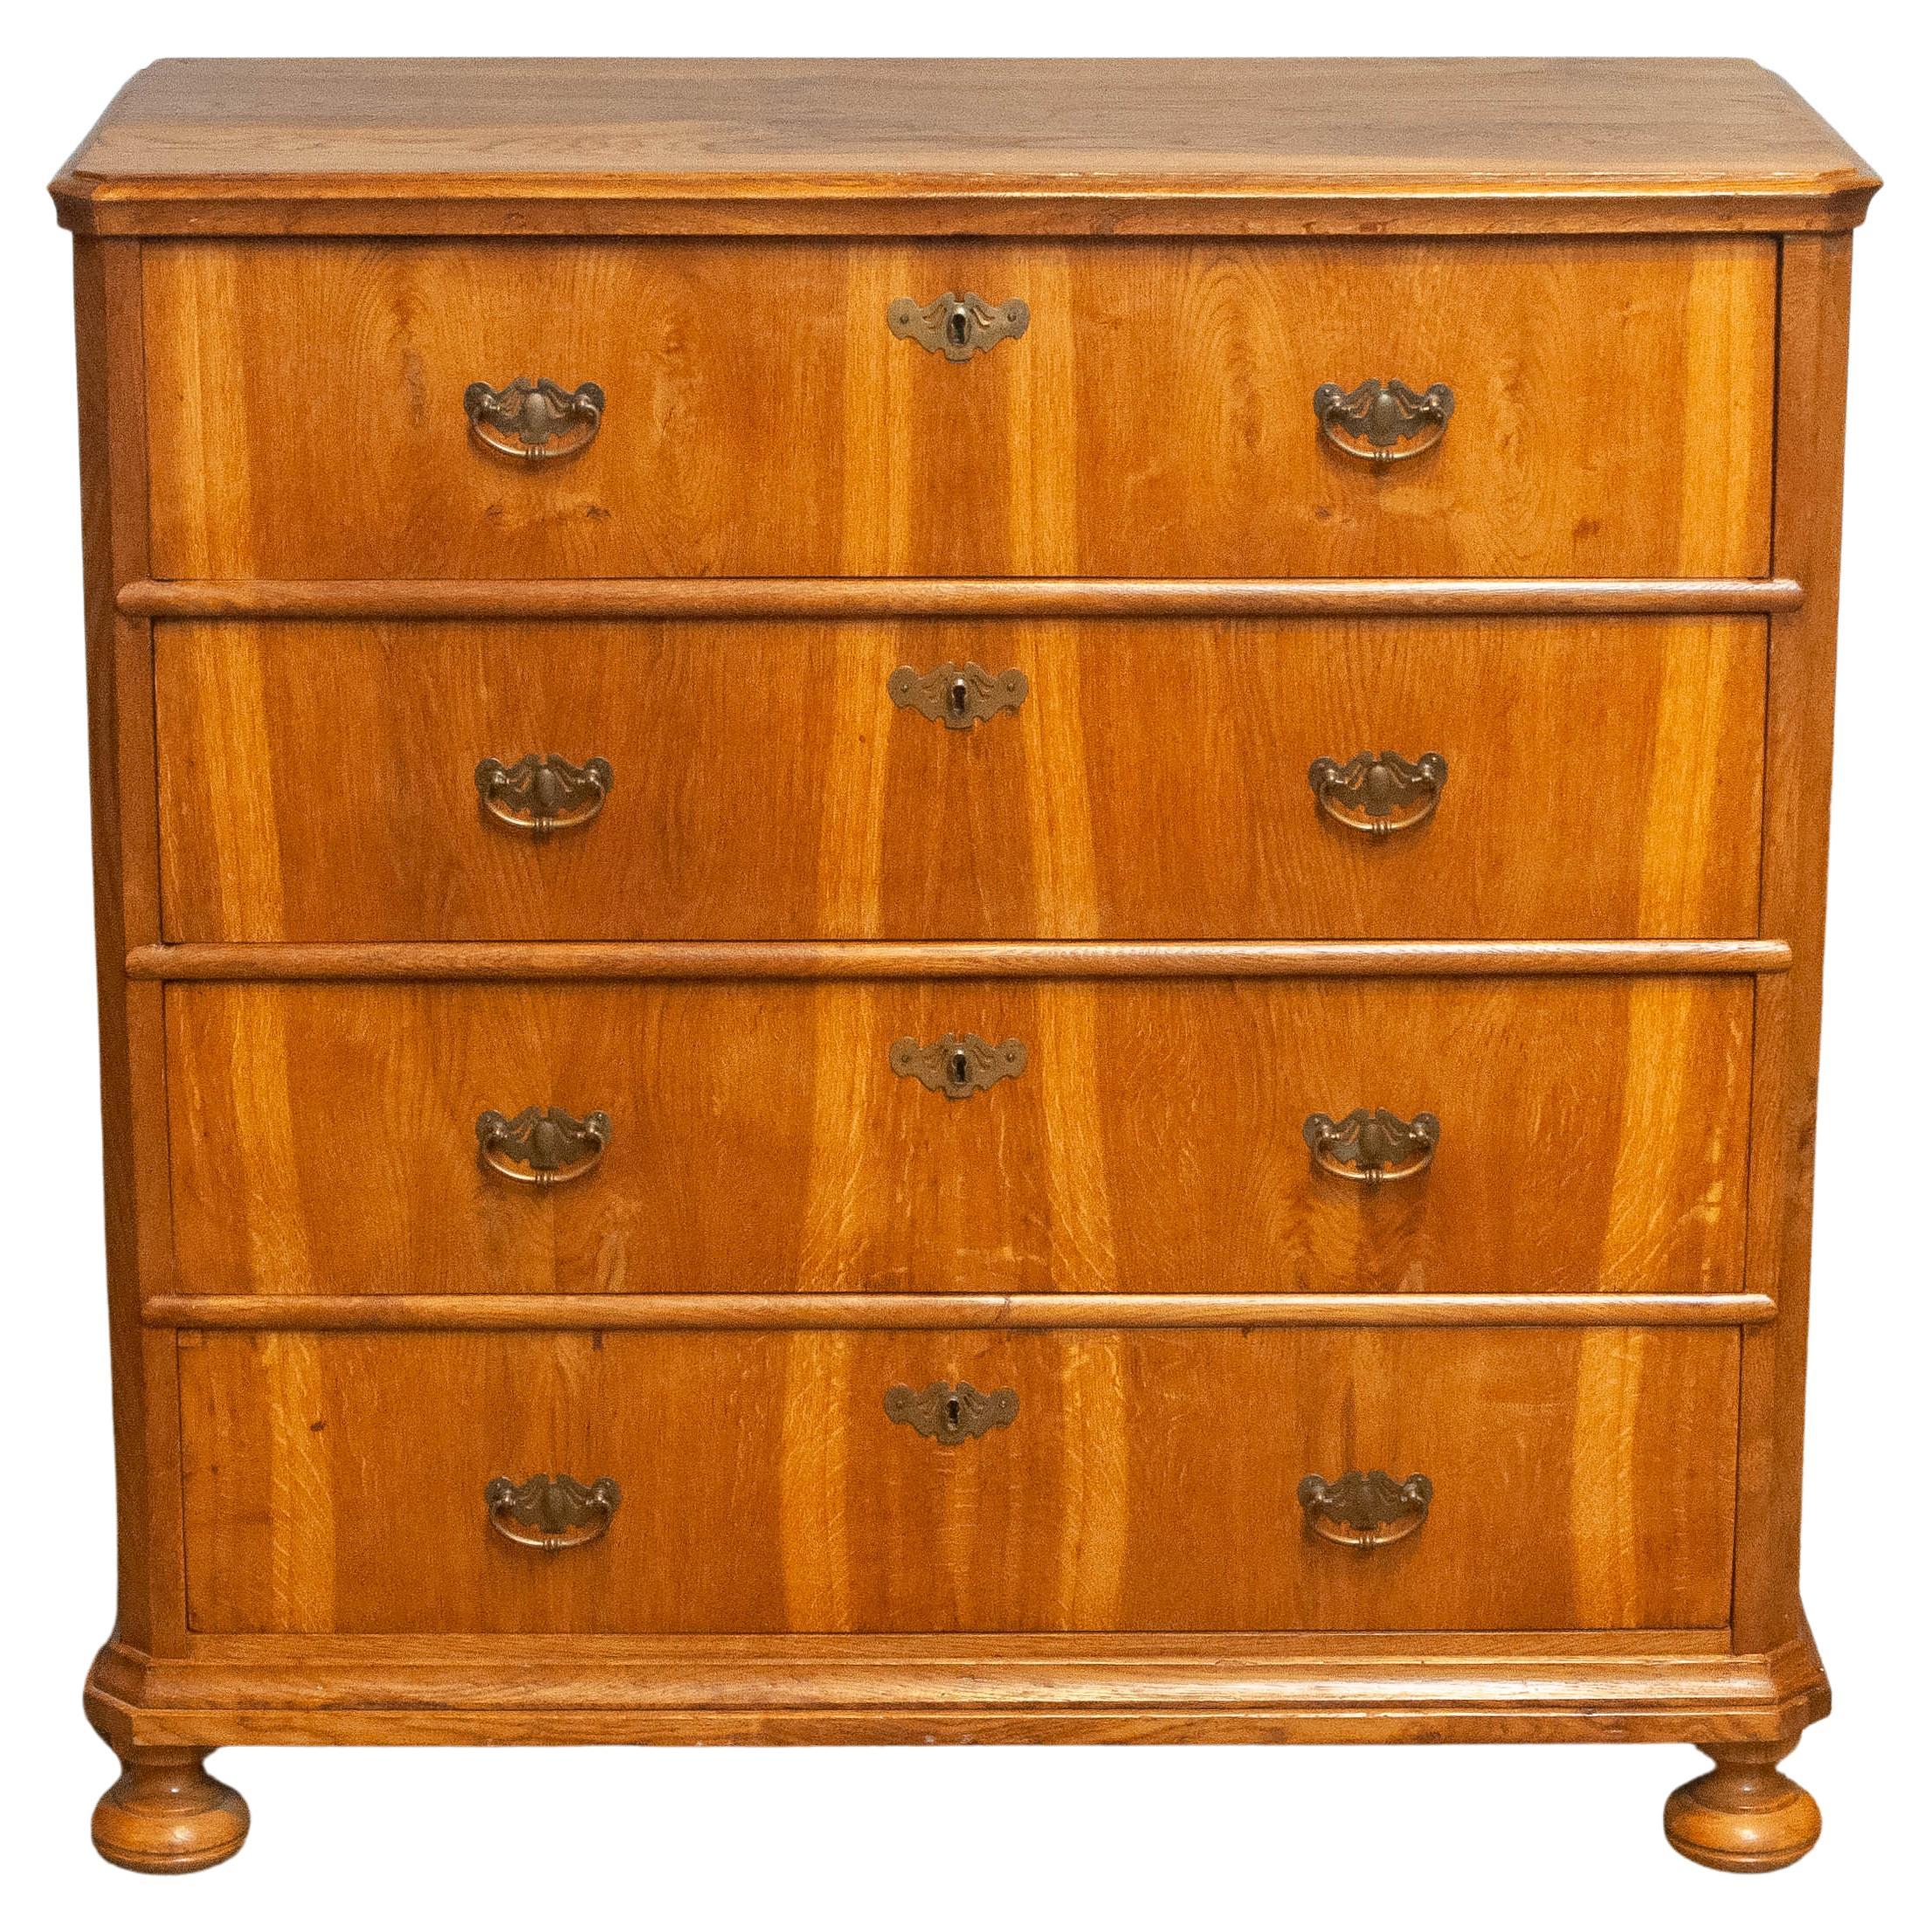 18th Century Biedermeier Commode / Drawer Cabinet with Book Matching Oak Drawers